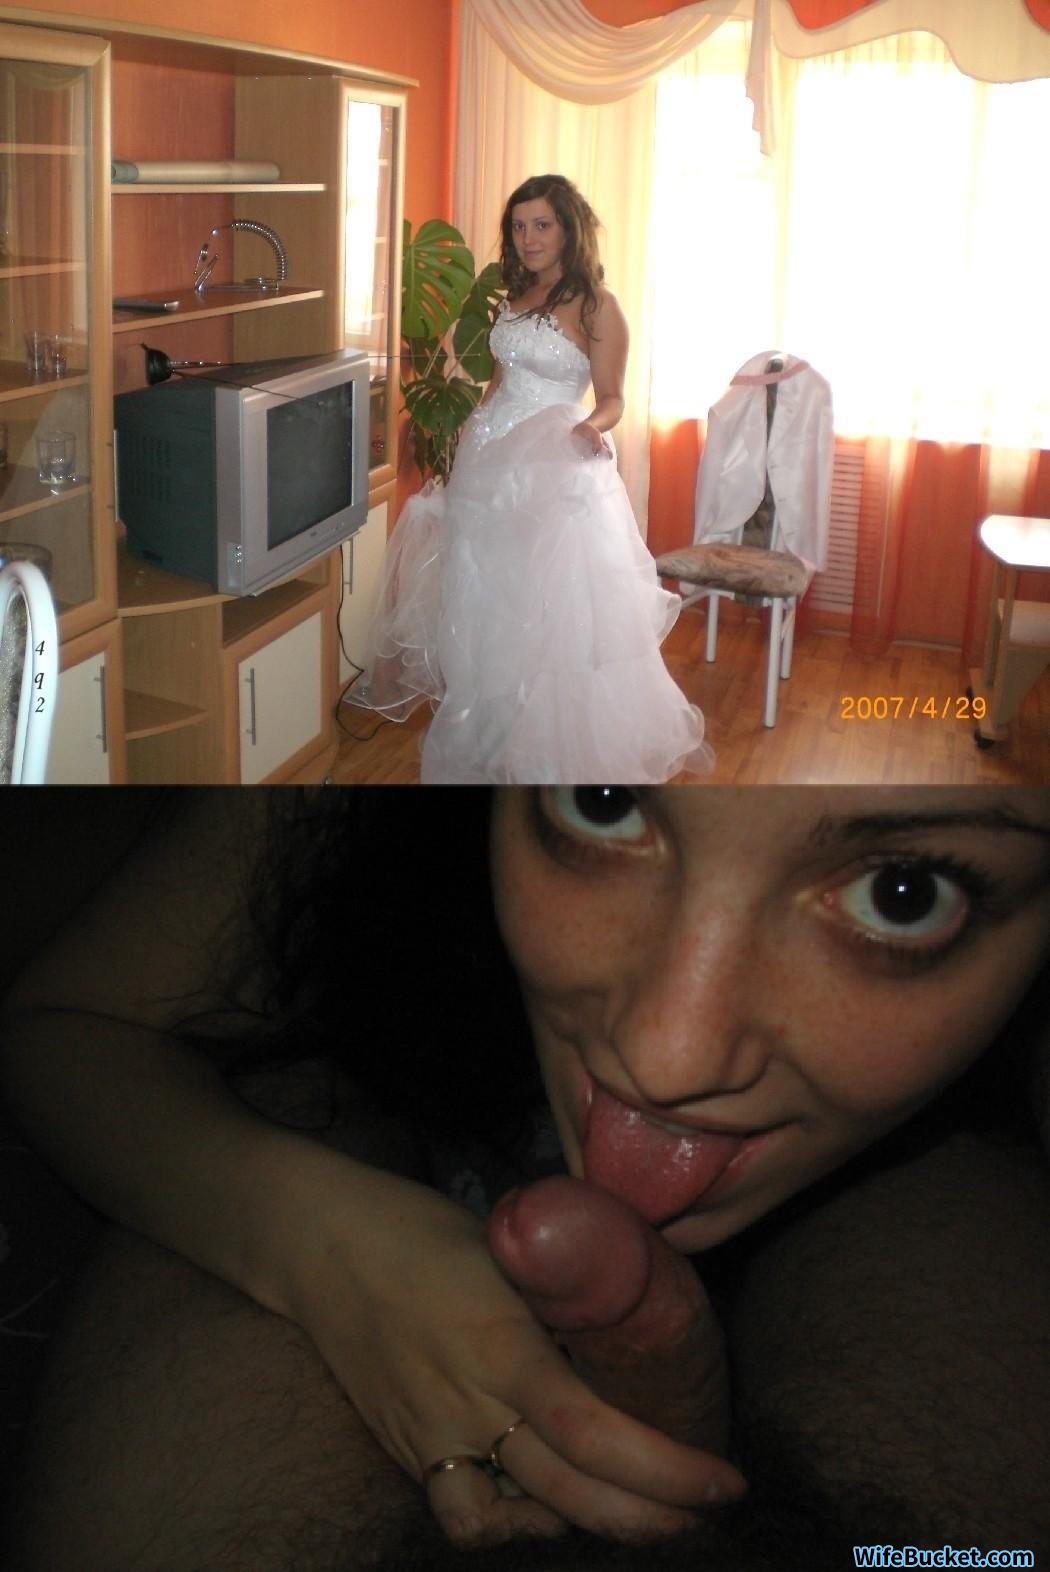 [gallery] Before After Nudes Of Real Brides Wifebucket Offical Milf Blog